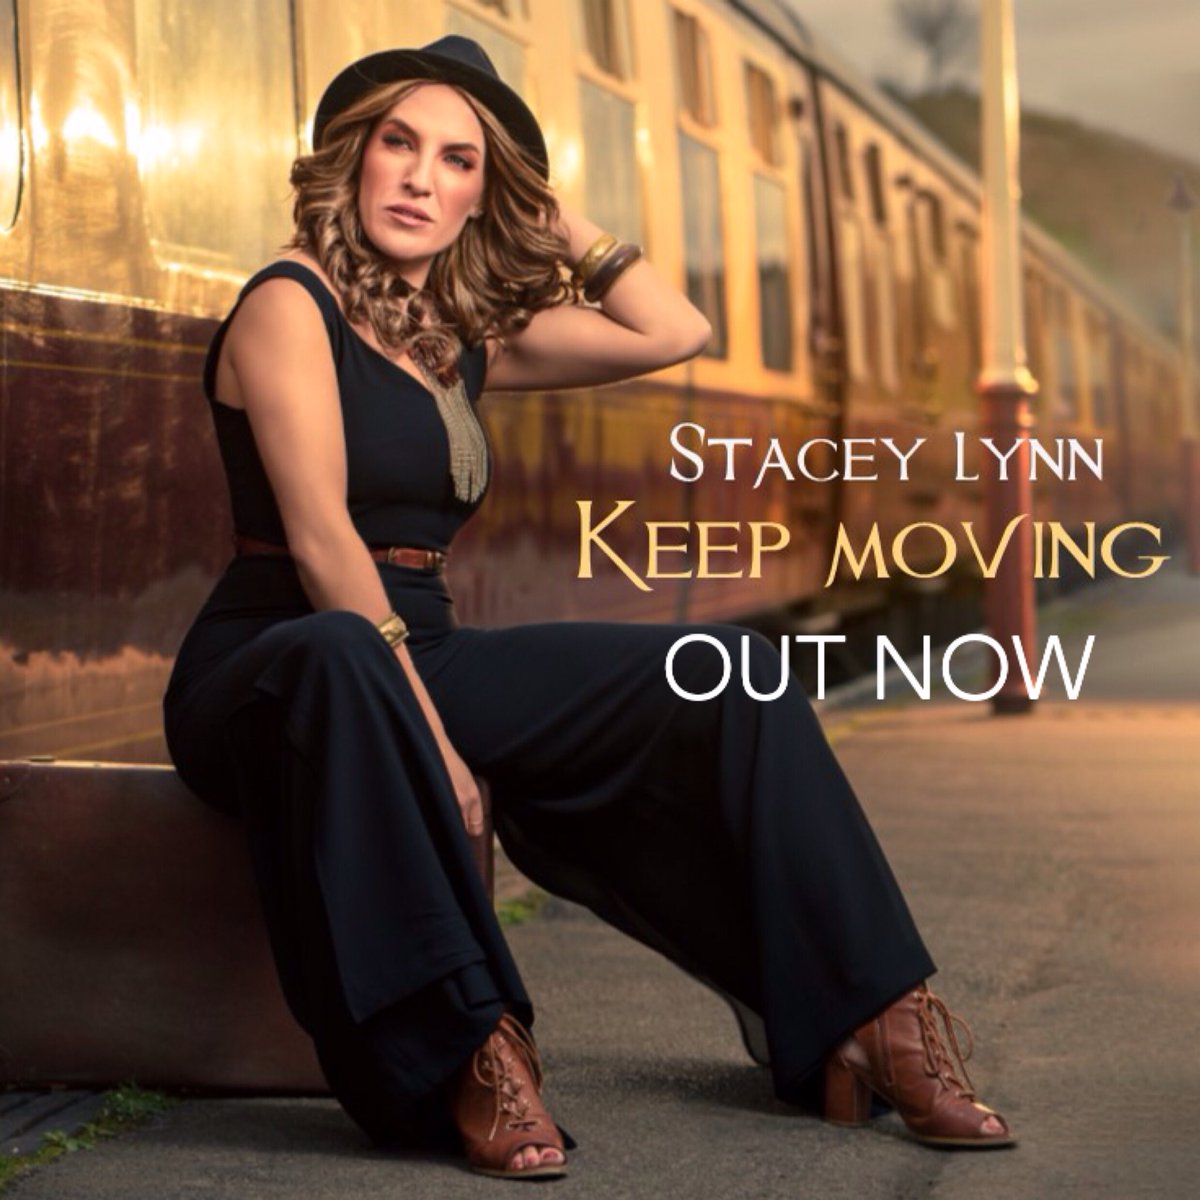 ⚡️ OUT NOW ⚡️
#KeepMoving is available across all music platforms !

Currently at #28 in the @itunes #CountryMusic charts 
Big thanks to @Pro2studios for making this happen ❤️

@countryhitsuk @BBCintroEMids @bbcintroducing 
#countrymusicuk #ukcountry  #debutalbum #bbcintroducing